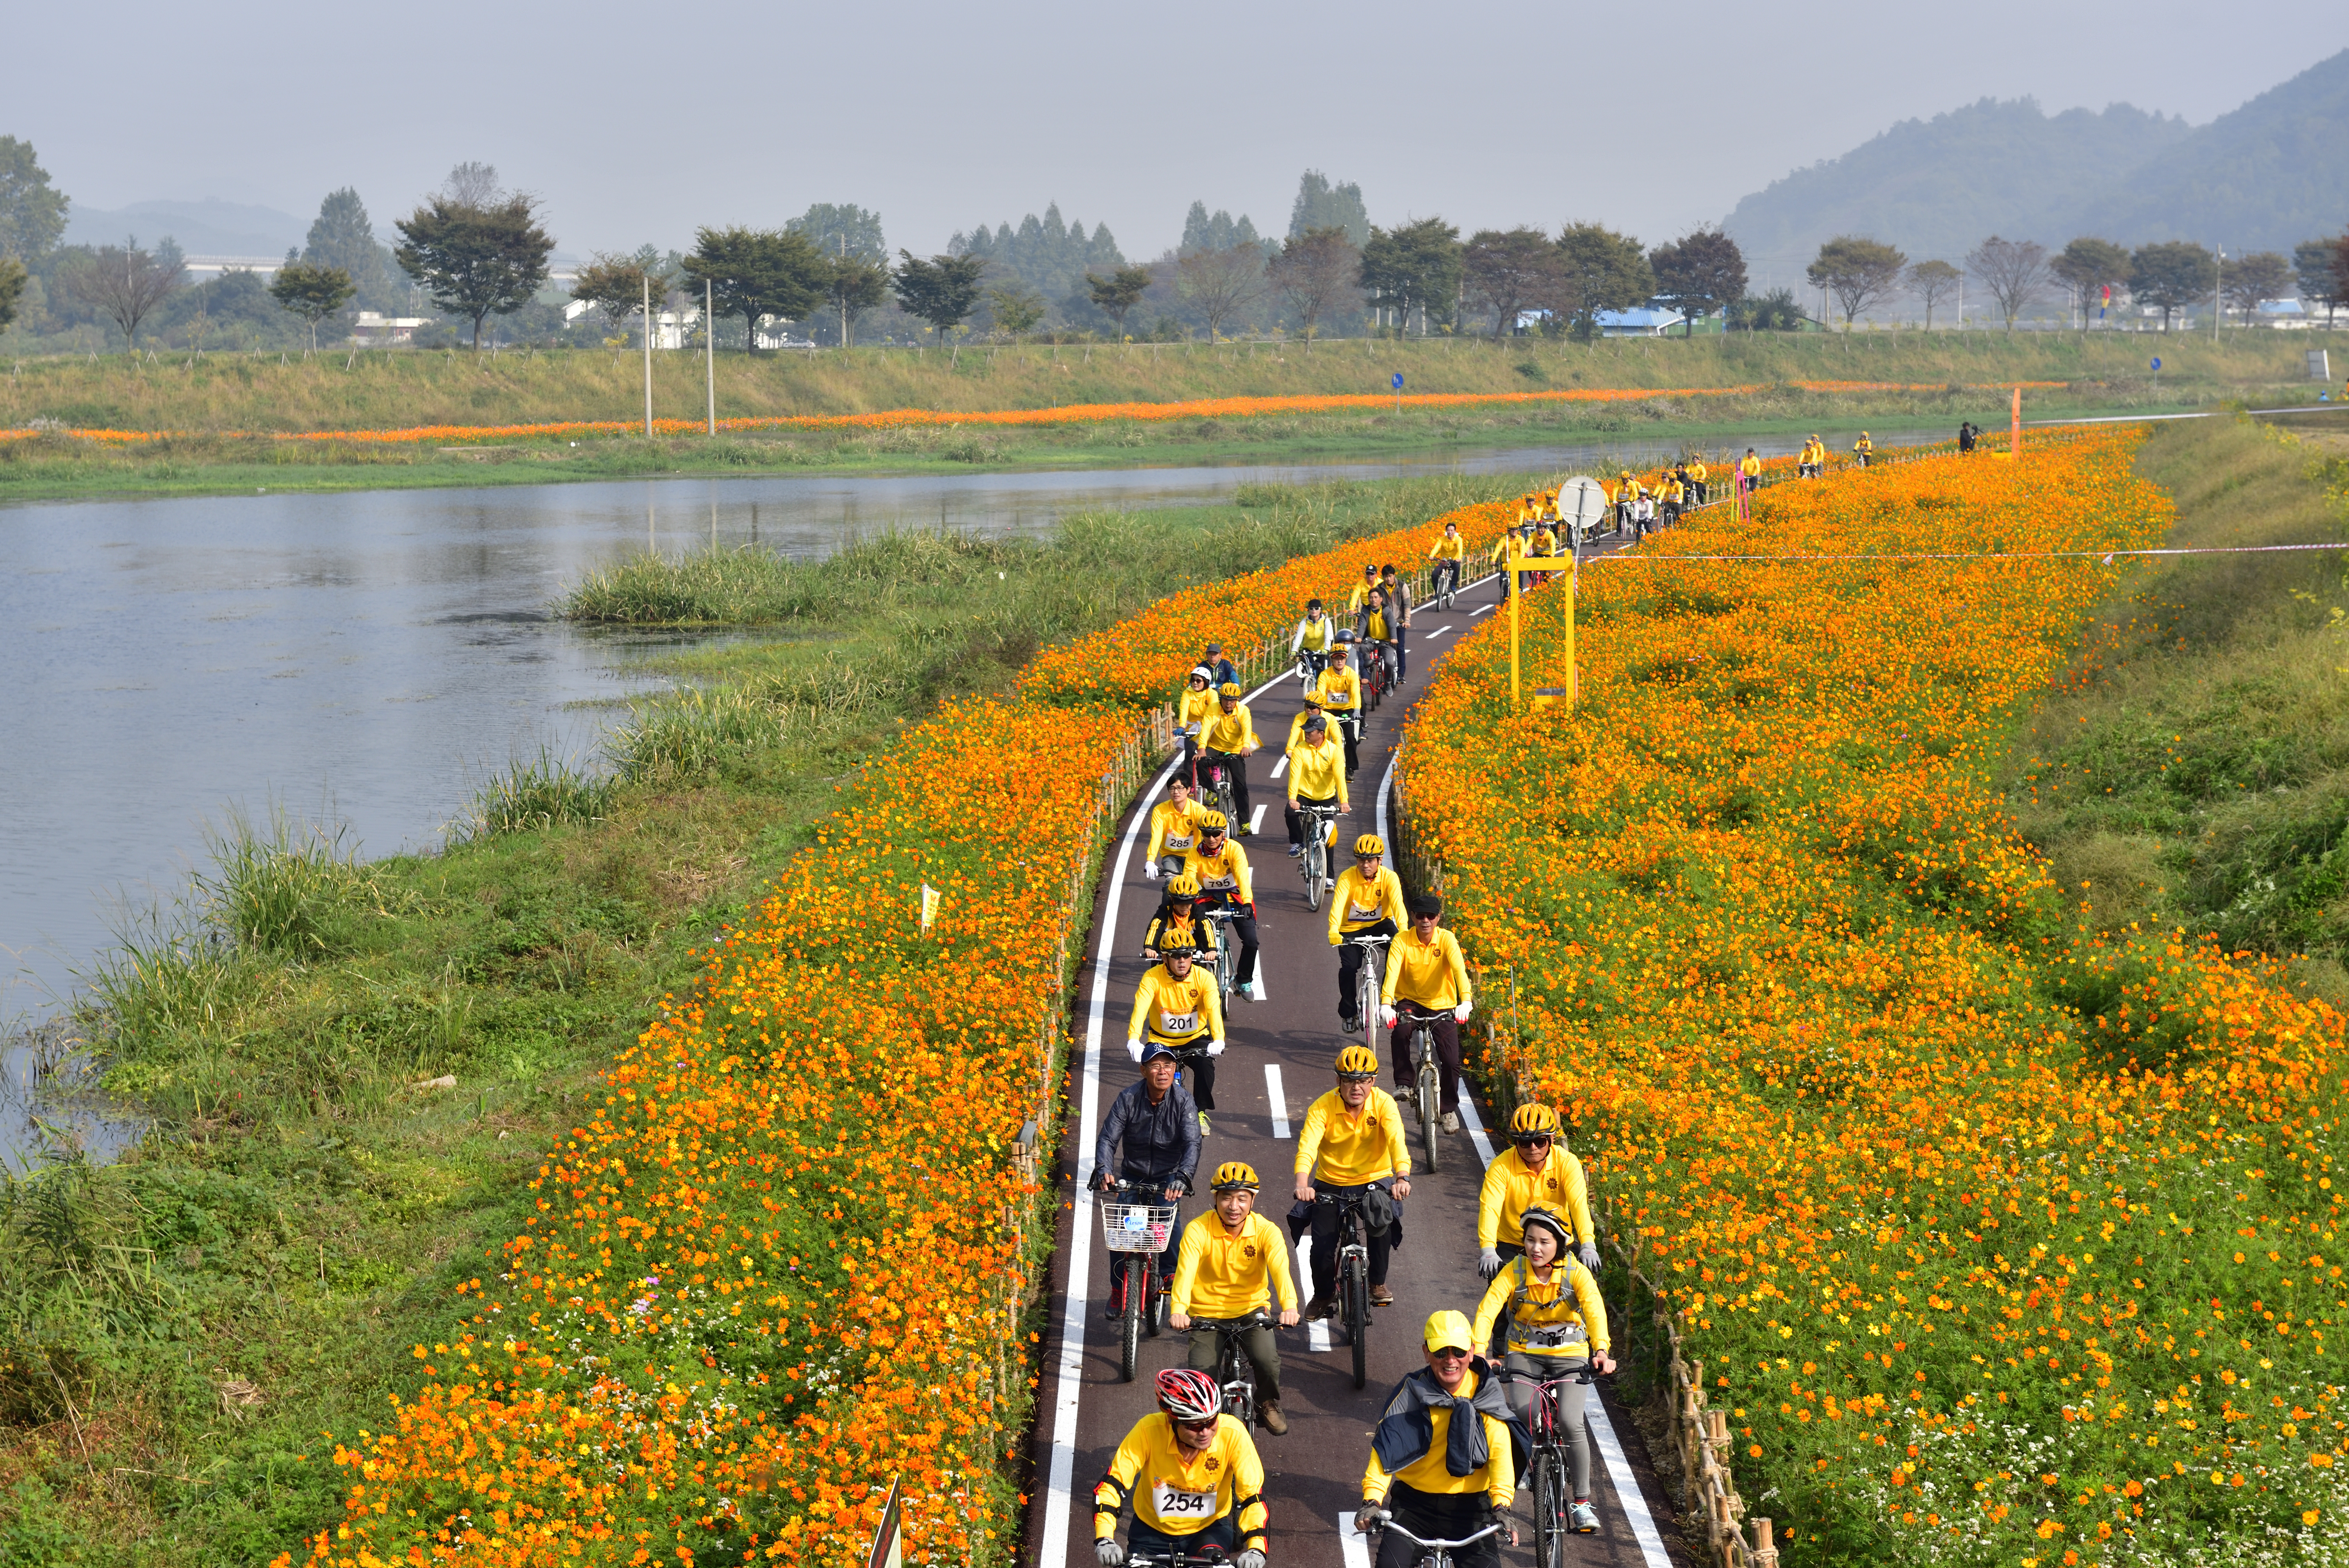 Whangryong river Yellow flower festival1